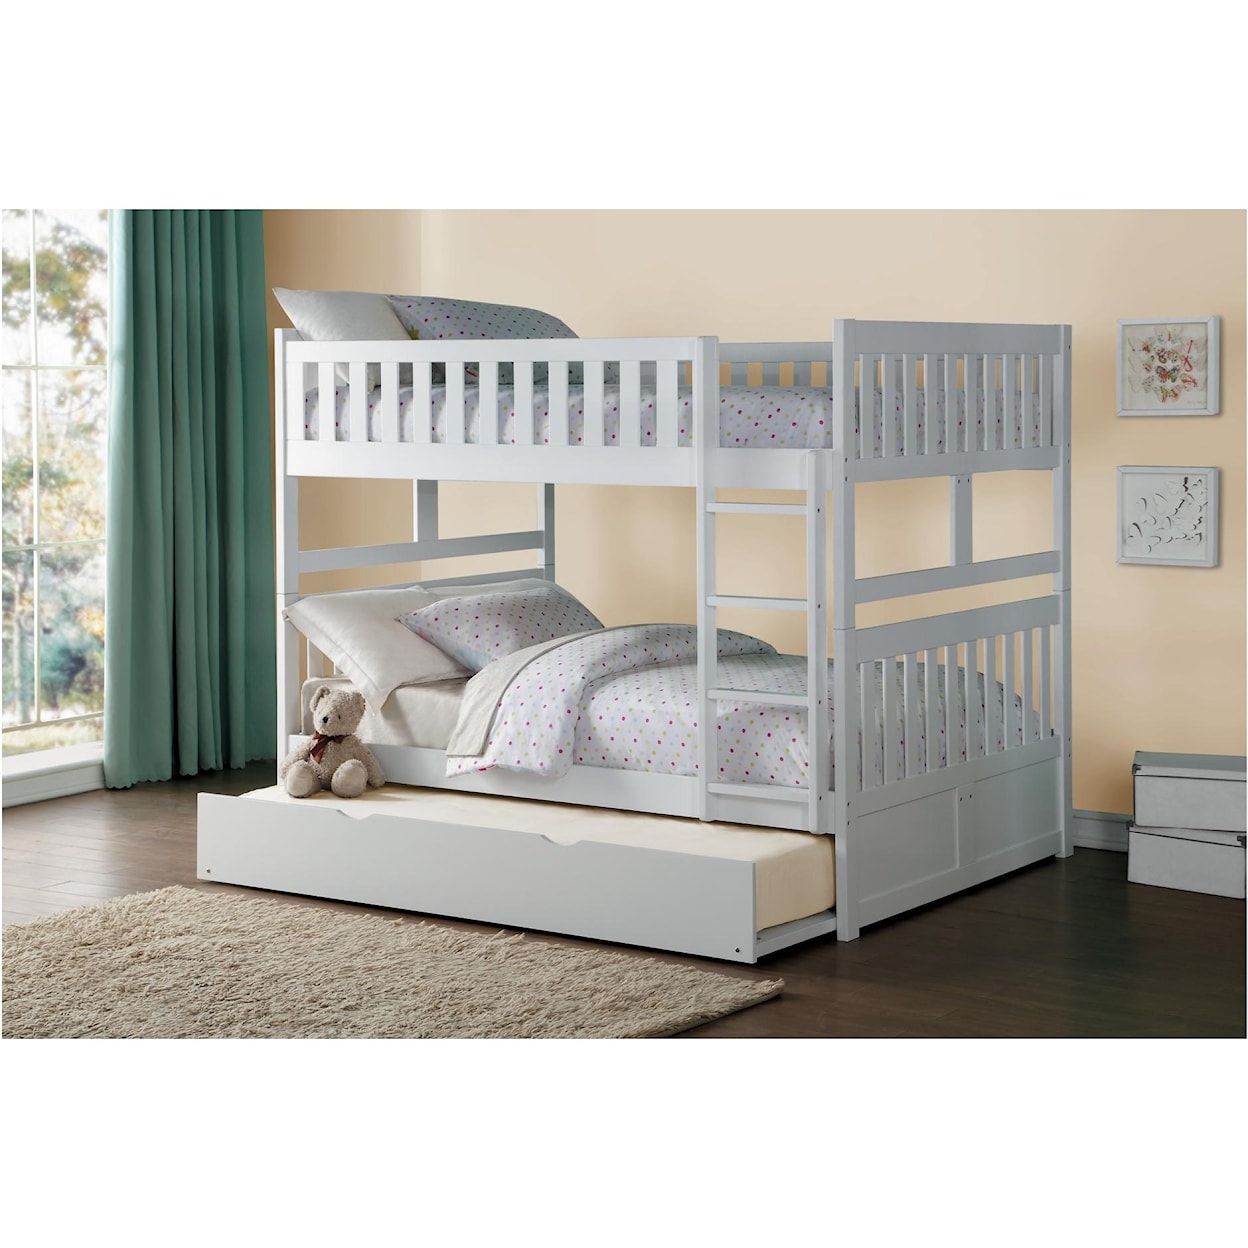 Home Style White Full Over Full Trundle Bunk Bed